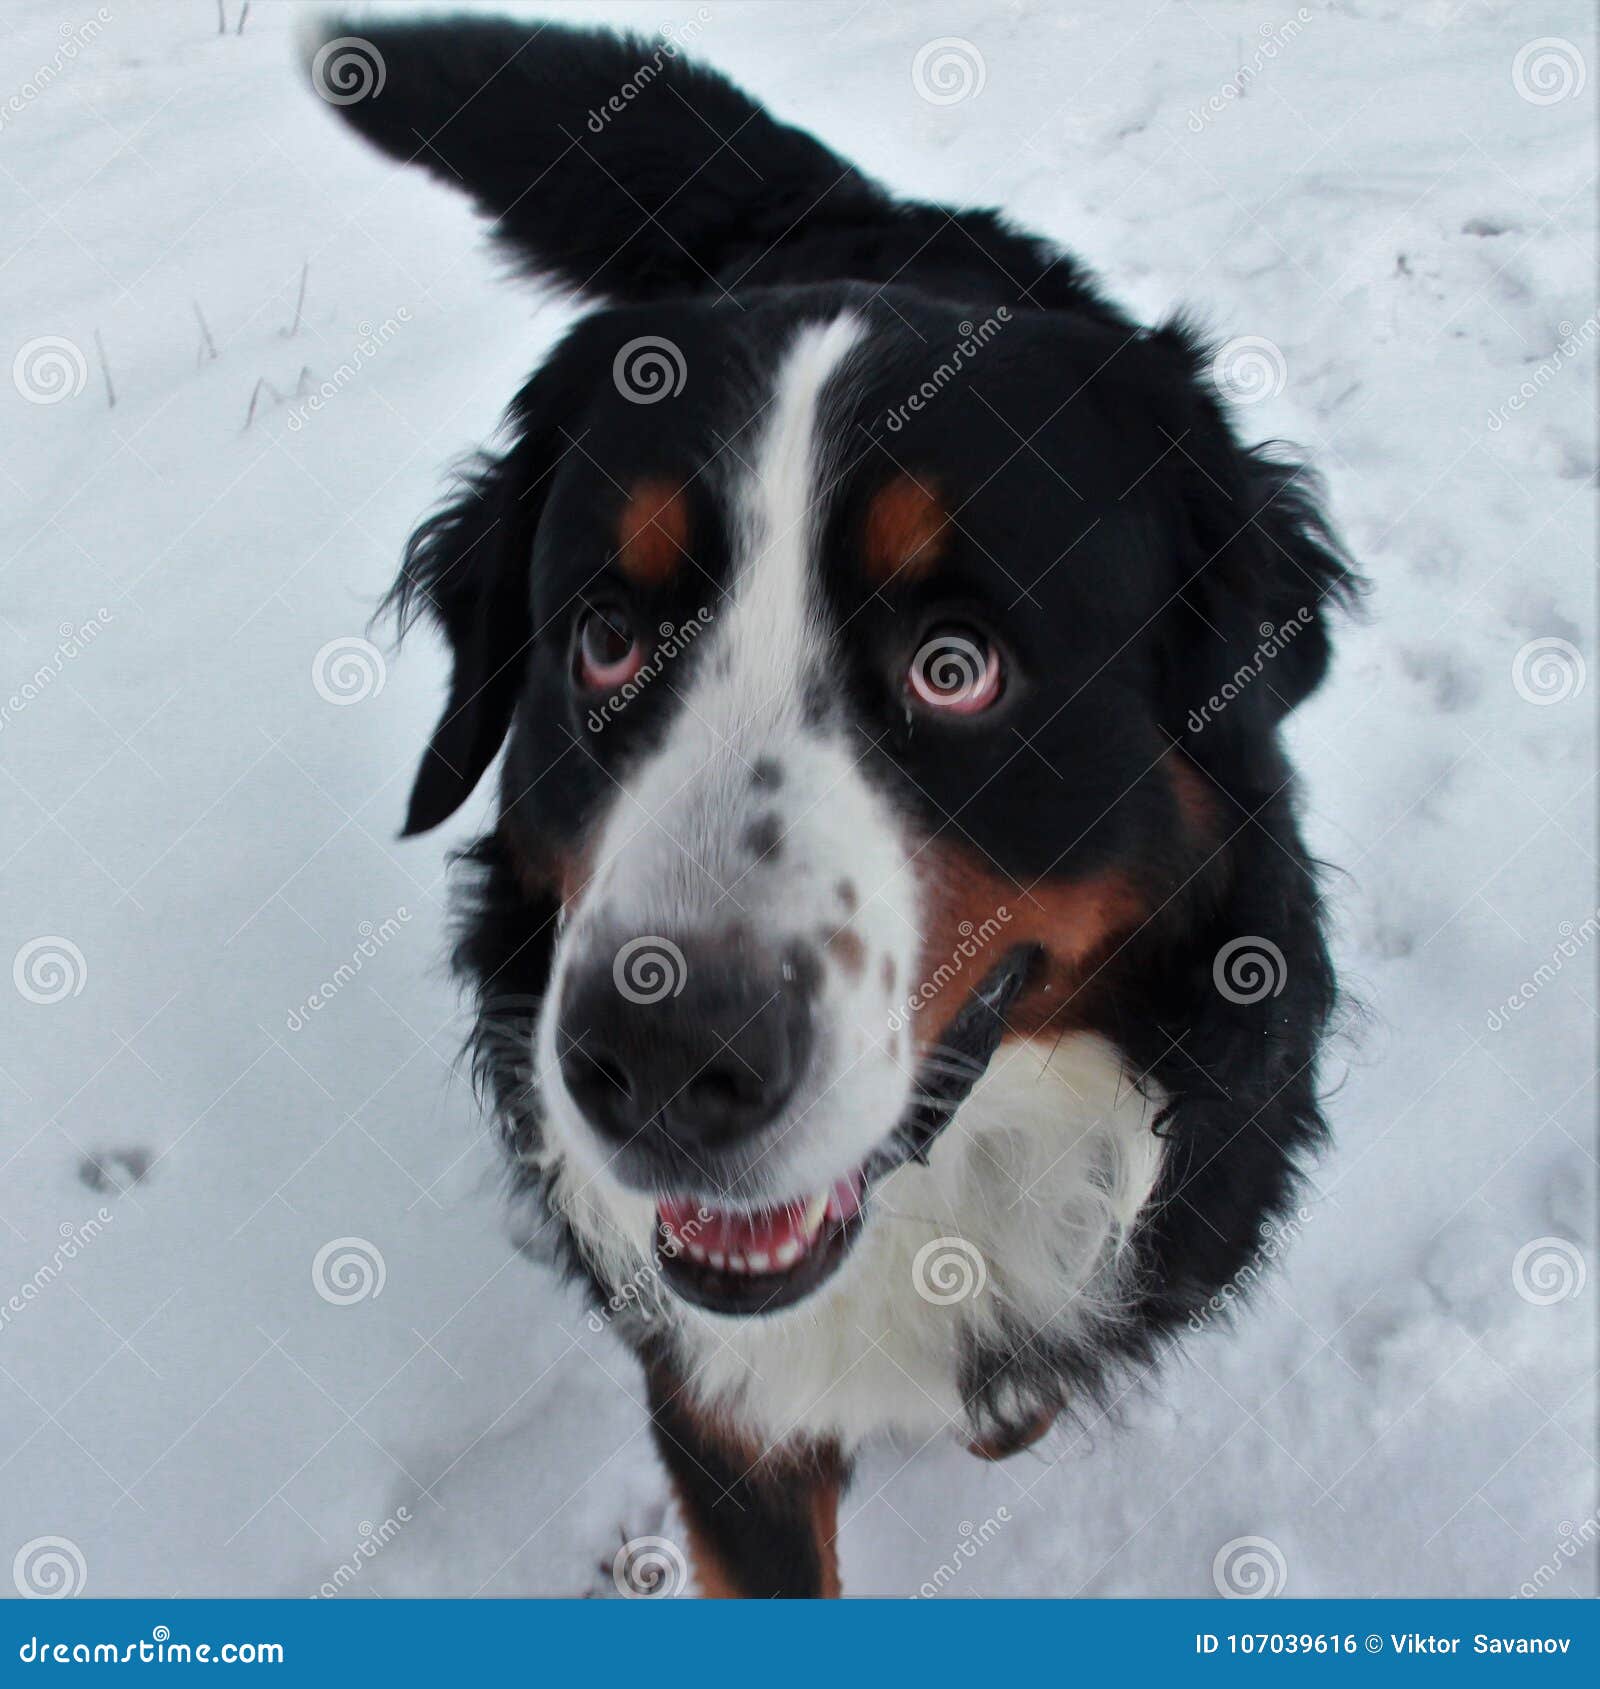 bernese mountain dog on a walk in the park.